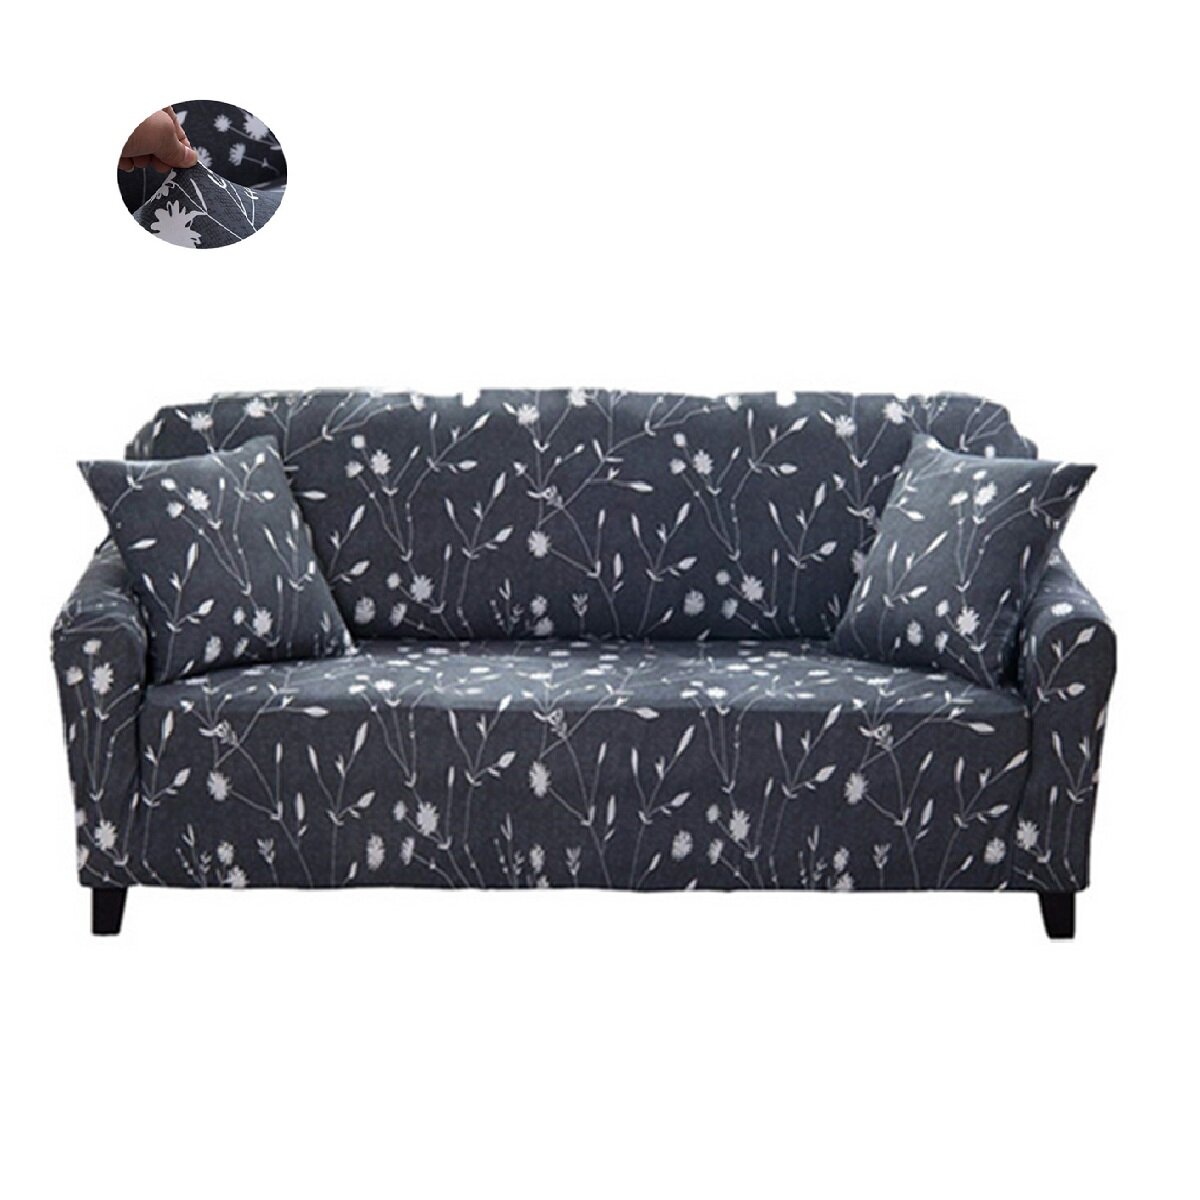 1/2/3/4 Seaters Elastic Sofa Cover Chair Seat Protector Couch Case Stretch Slipcover Home Office Furniture Decorations